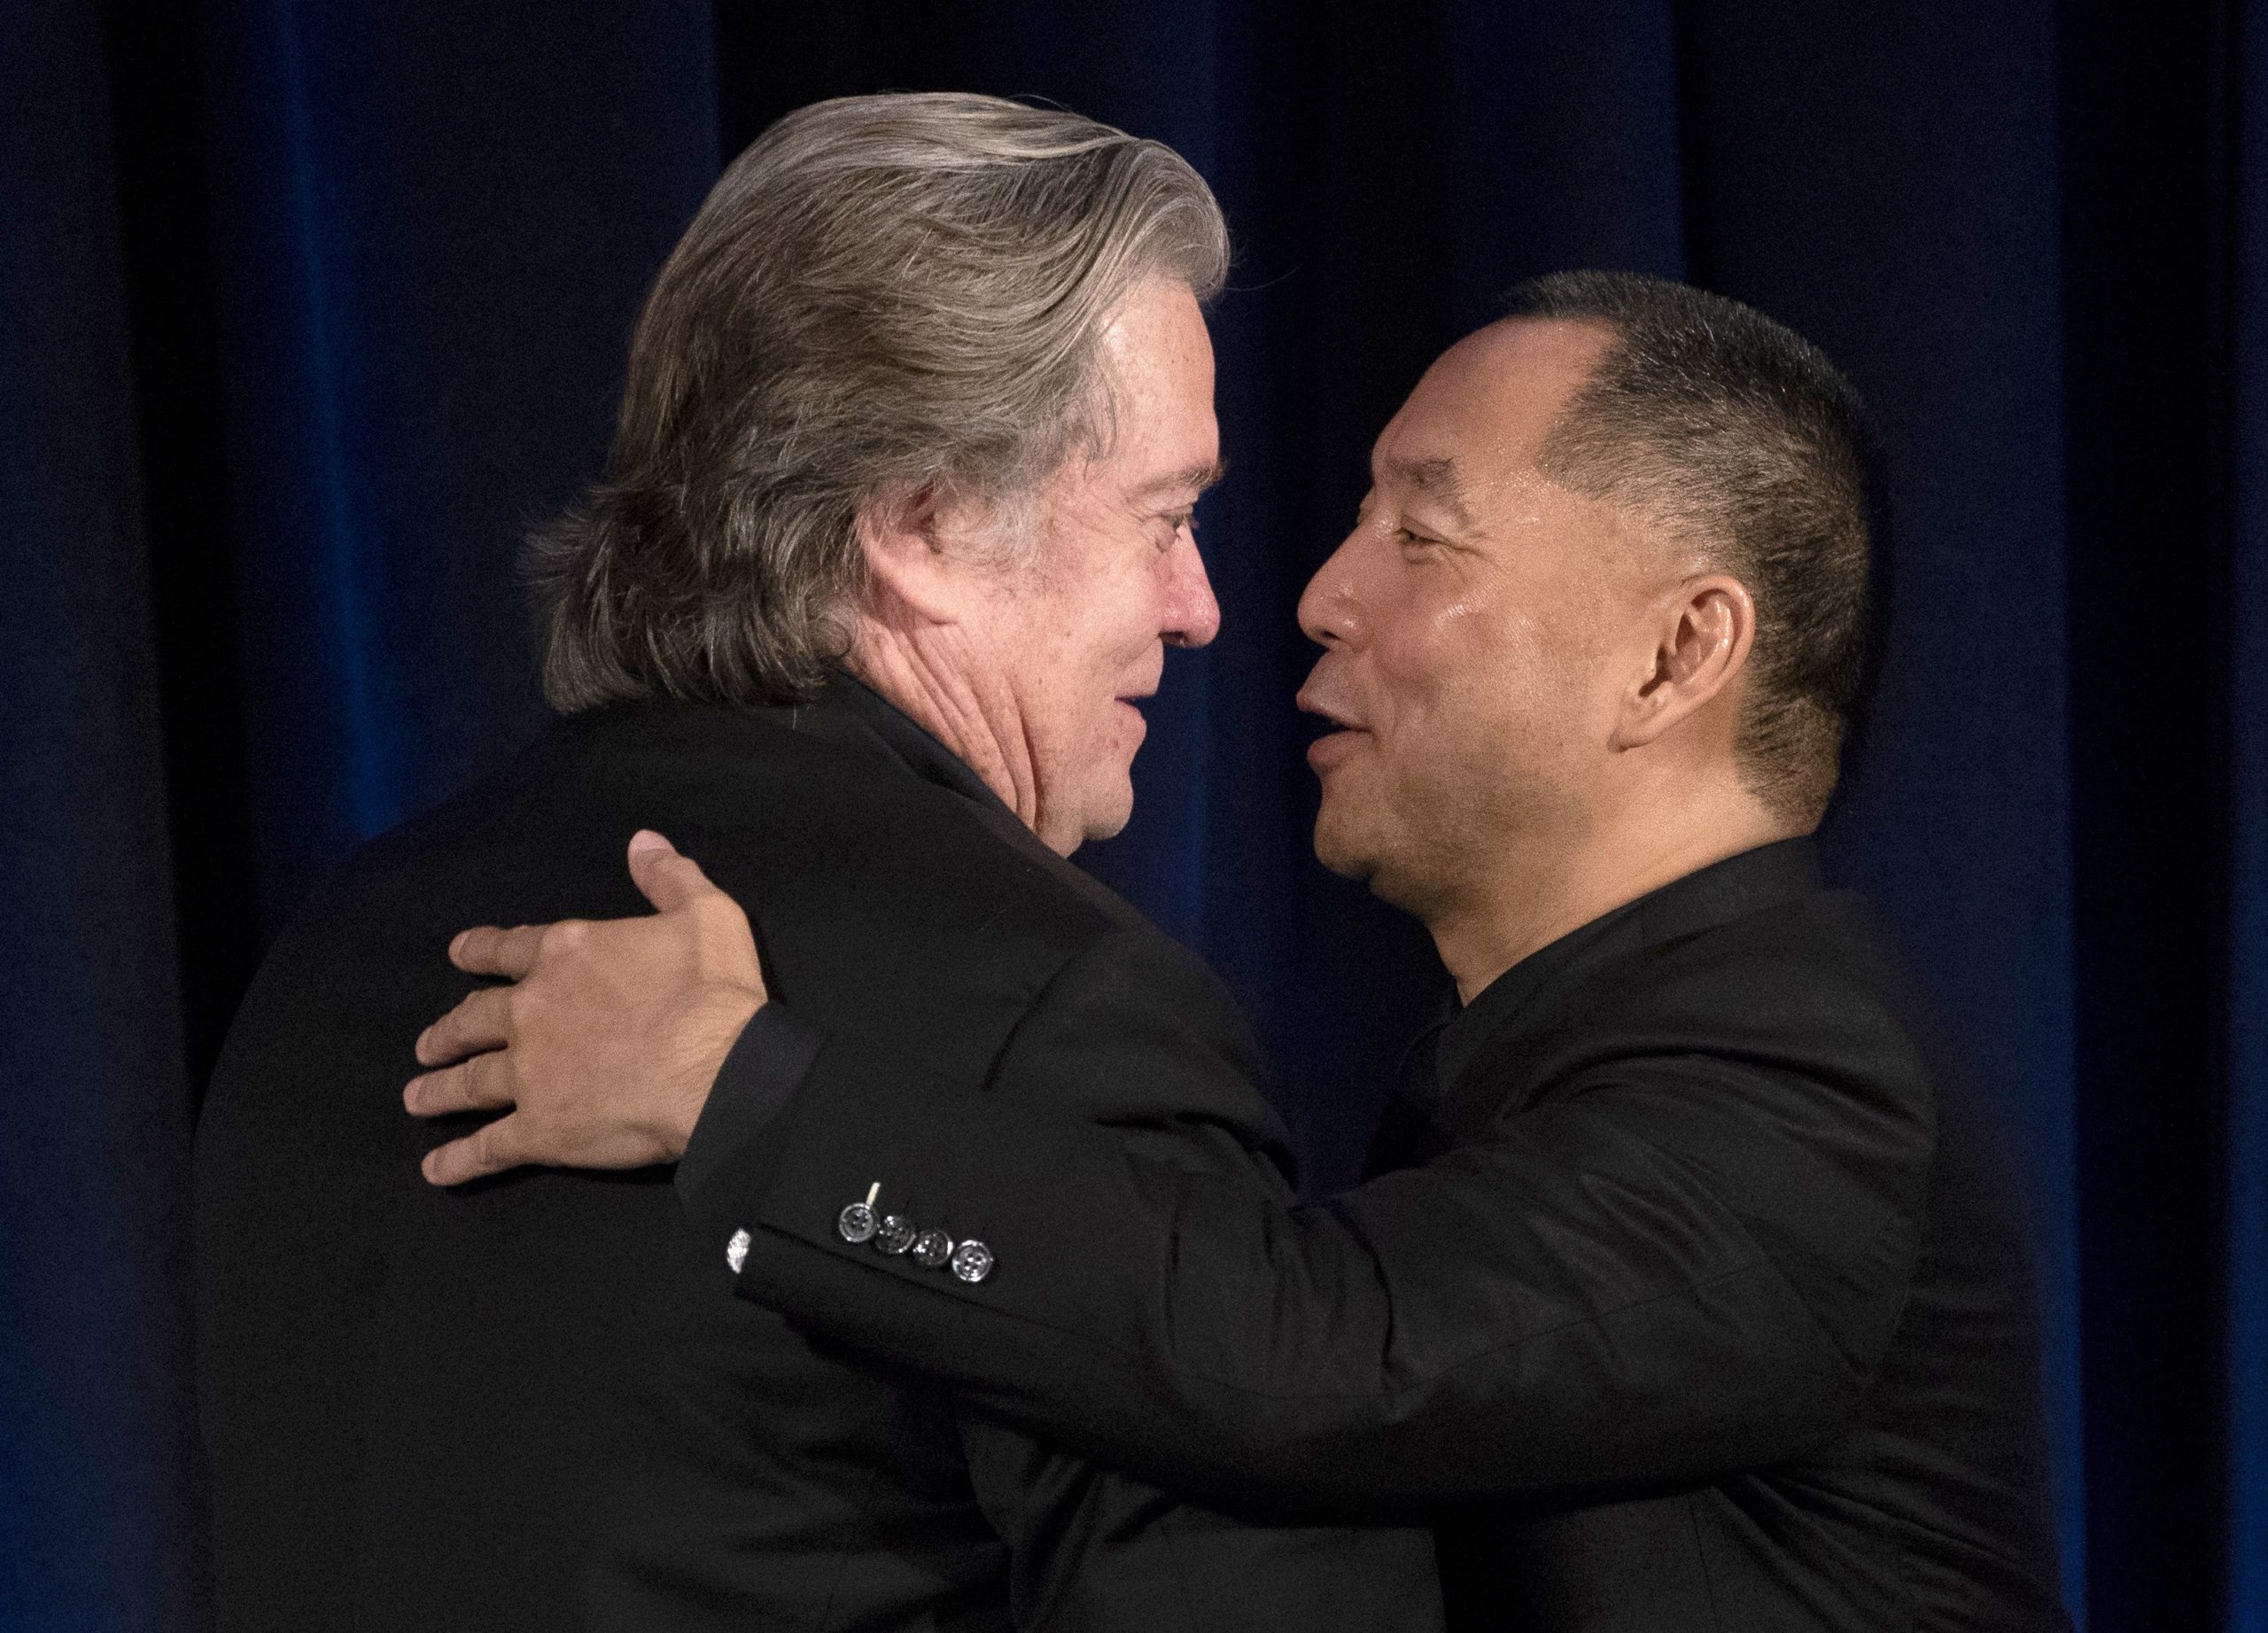 Former White House Chief Strategist Steve Bannon (L) greets fugitive Chinese billionaire Guo Wengui before introducing him at a news conference on November 20, 2018 in New York, on the death of of tycoon Wang Jian in France on July 3, 2018. (Photo by Don EMMERT / AFP via Getty Images)